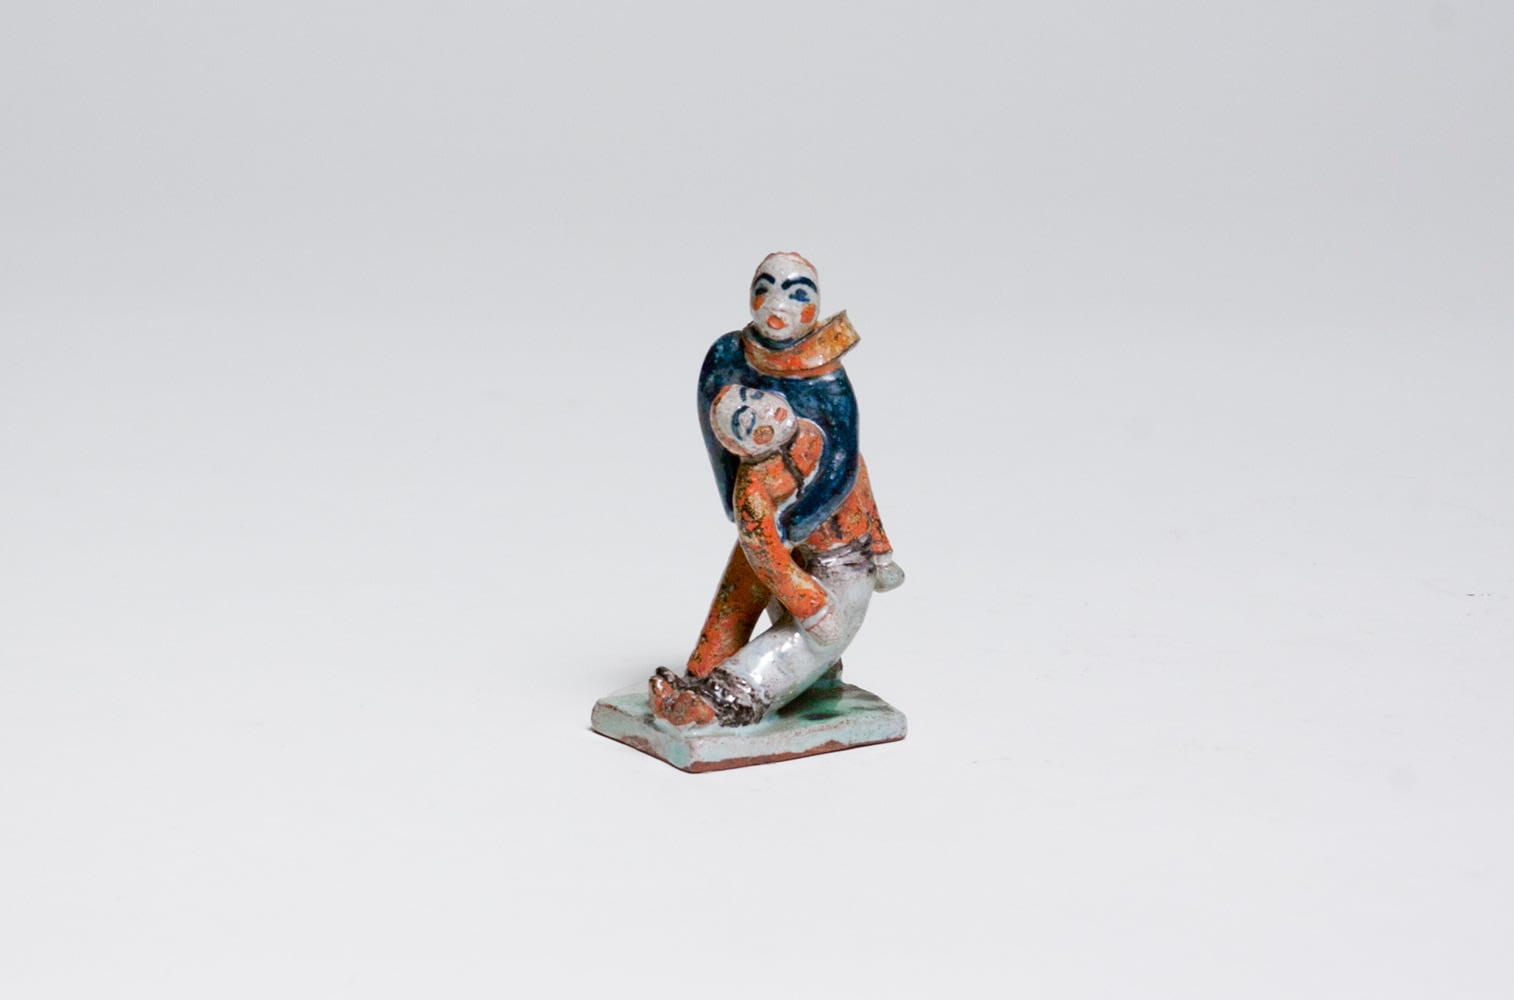 a small glazed ceramic sculpture of two figures who appear to be figure skating, one falling into the arms of the other whose scarf is blowing in the wind